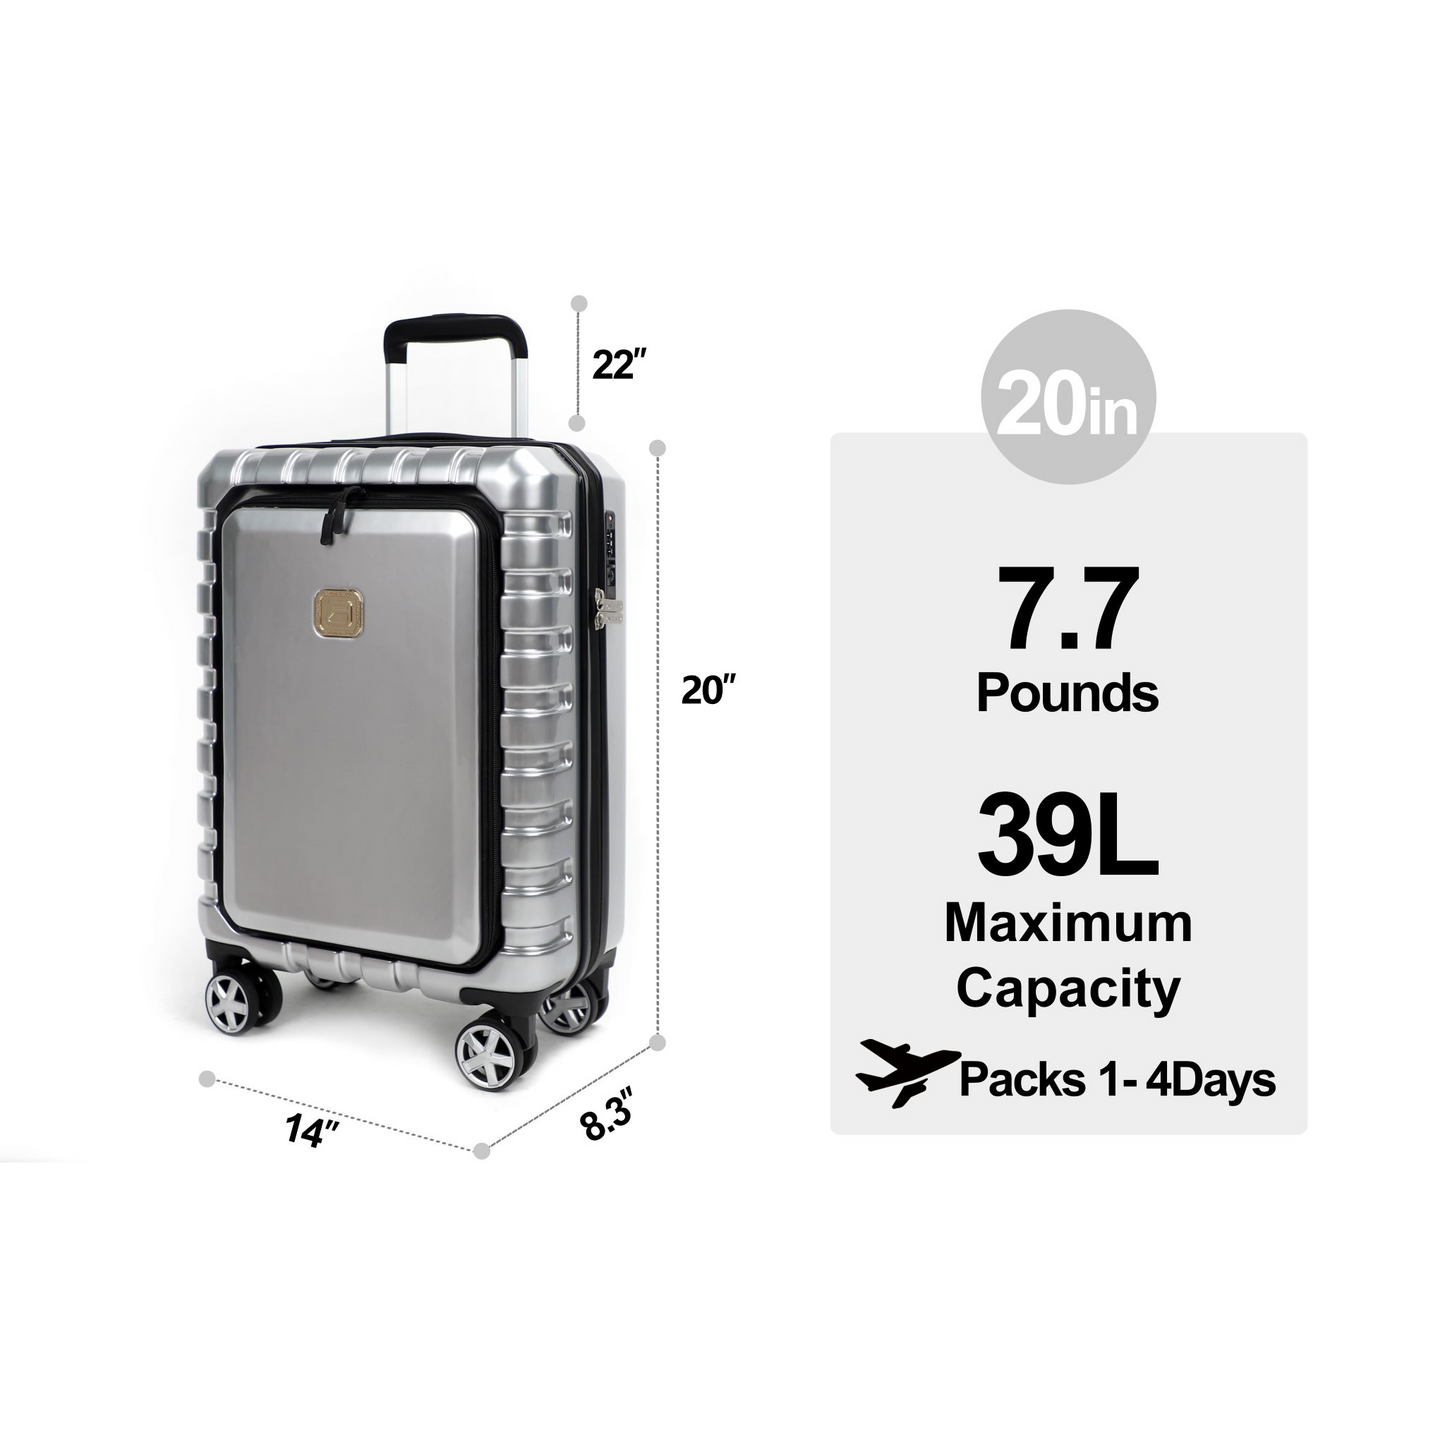 Airline_Carry_On_Luggage_Silver_Size_T1978155103